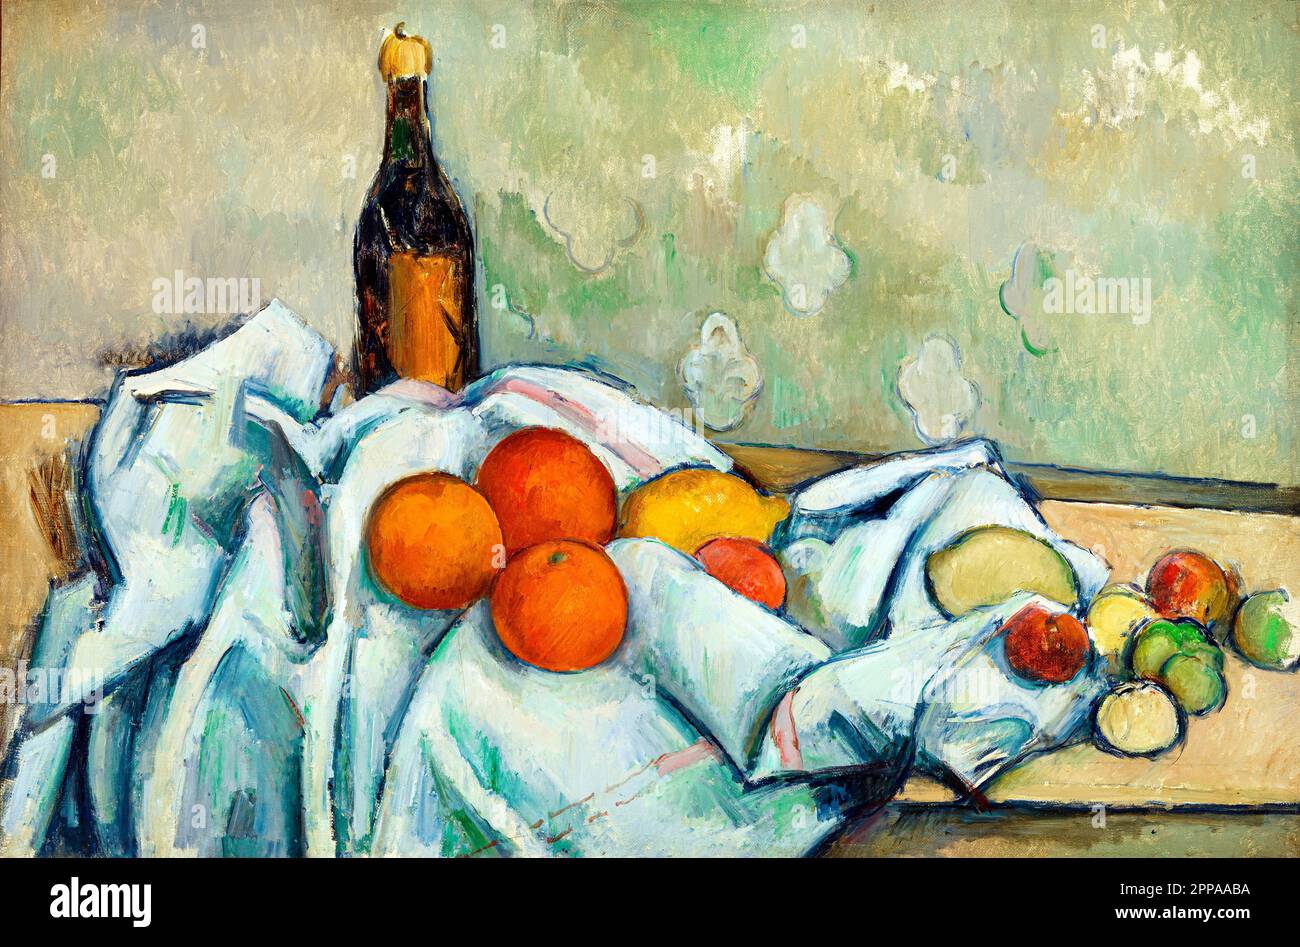 Bottle and Fruits by Paul Ceacute; zanne. Original from Original from Barnes Foundation. Stock Photo